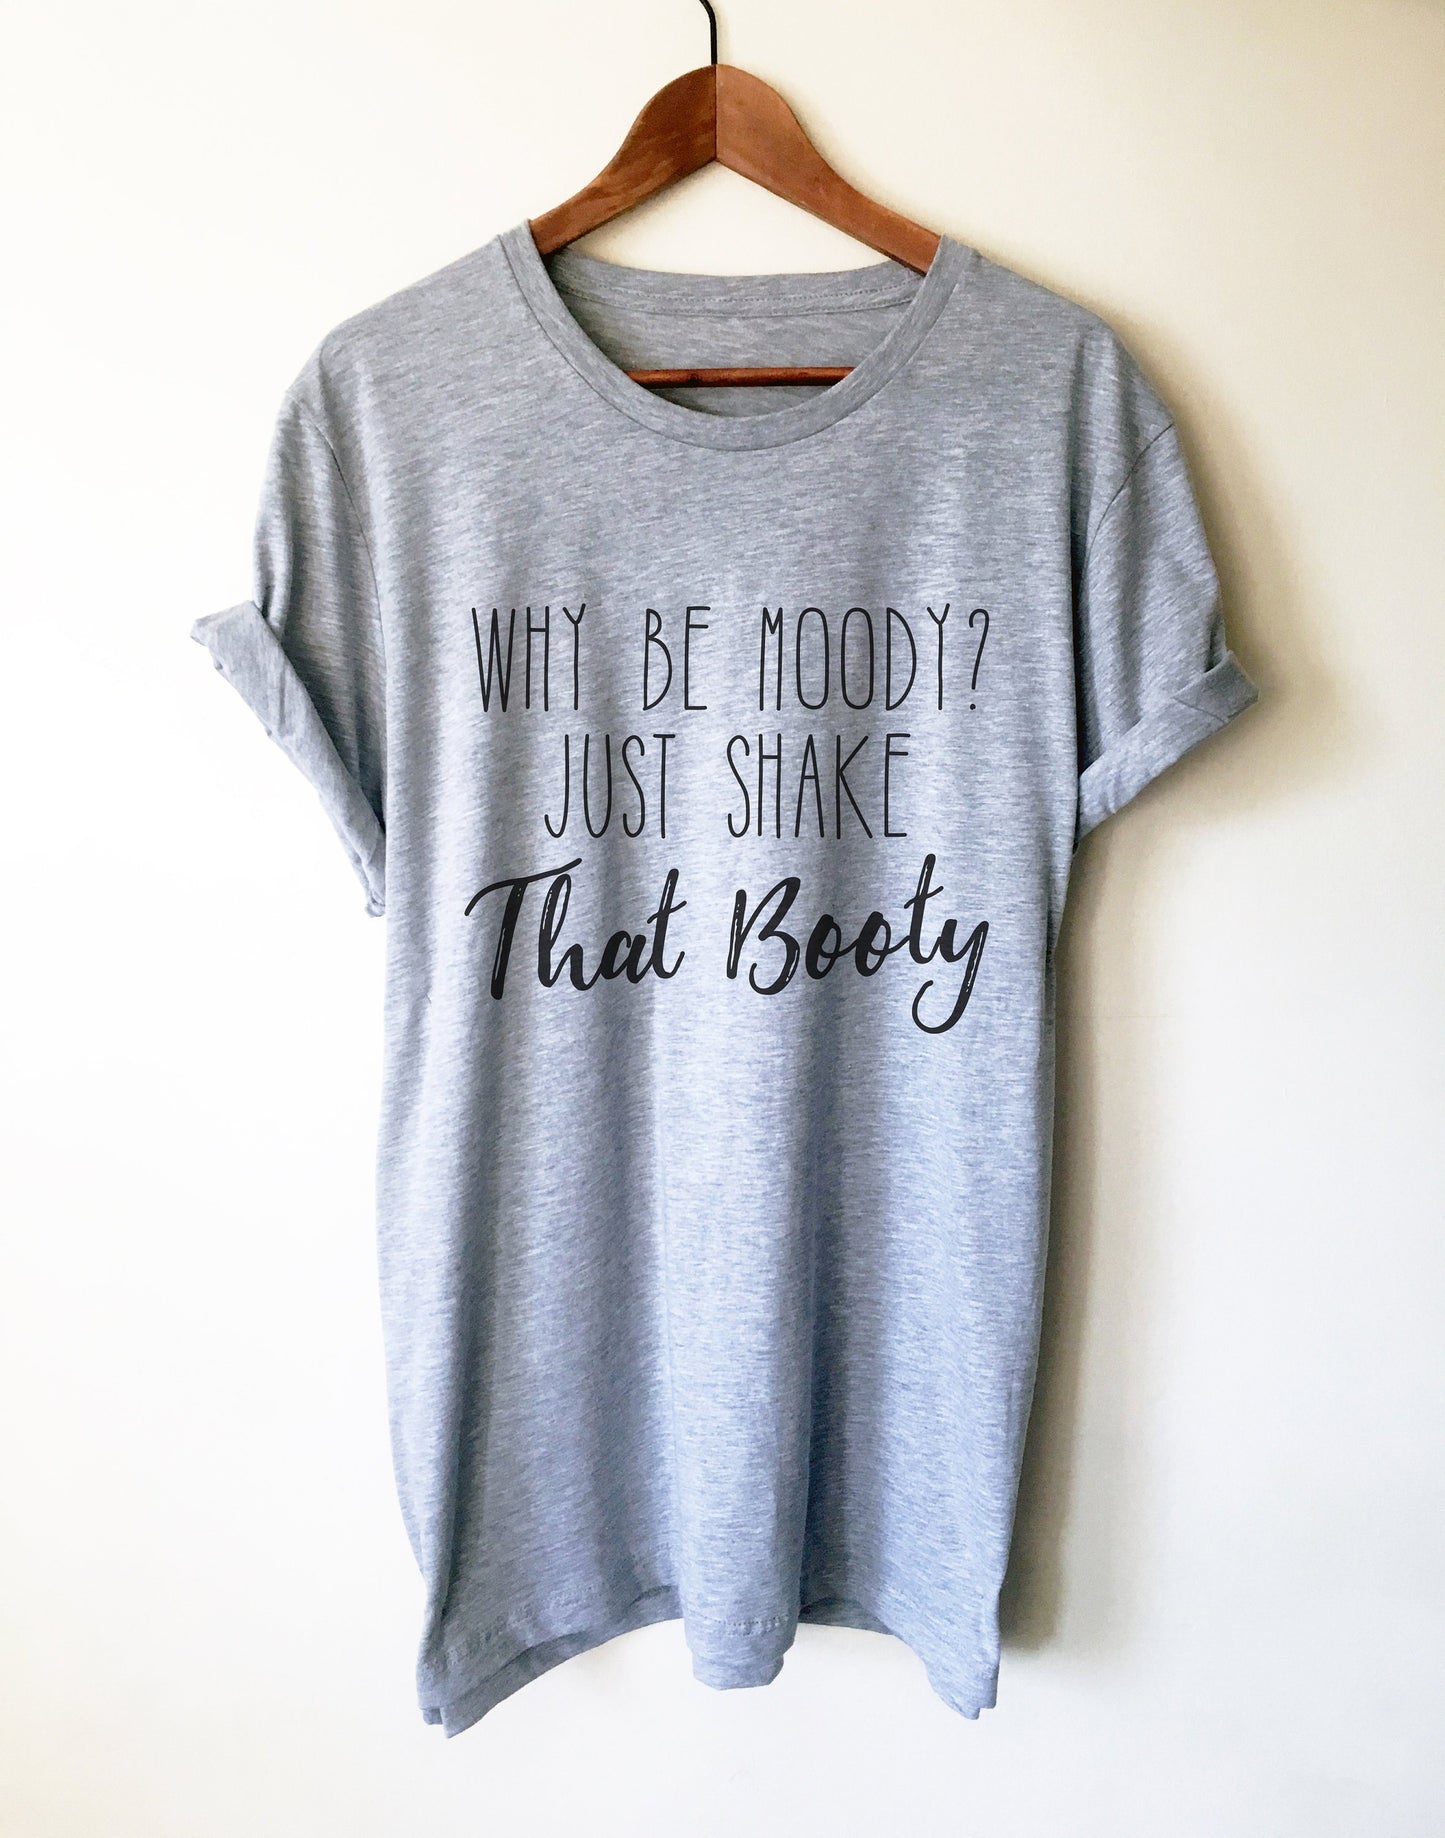 Why Be Moody Just Shake That Booty Unisex Shirt - Pole Dance Shirt, Pole Dance Gift, Pole Dance Wear, Pole Wear, Costume Pole Dance